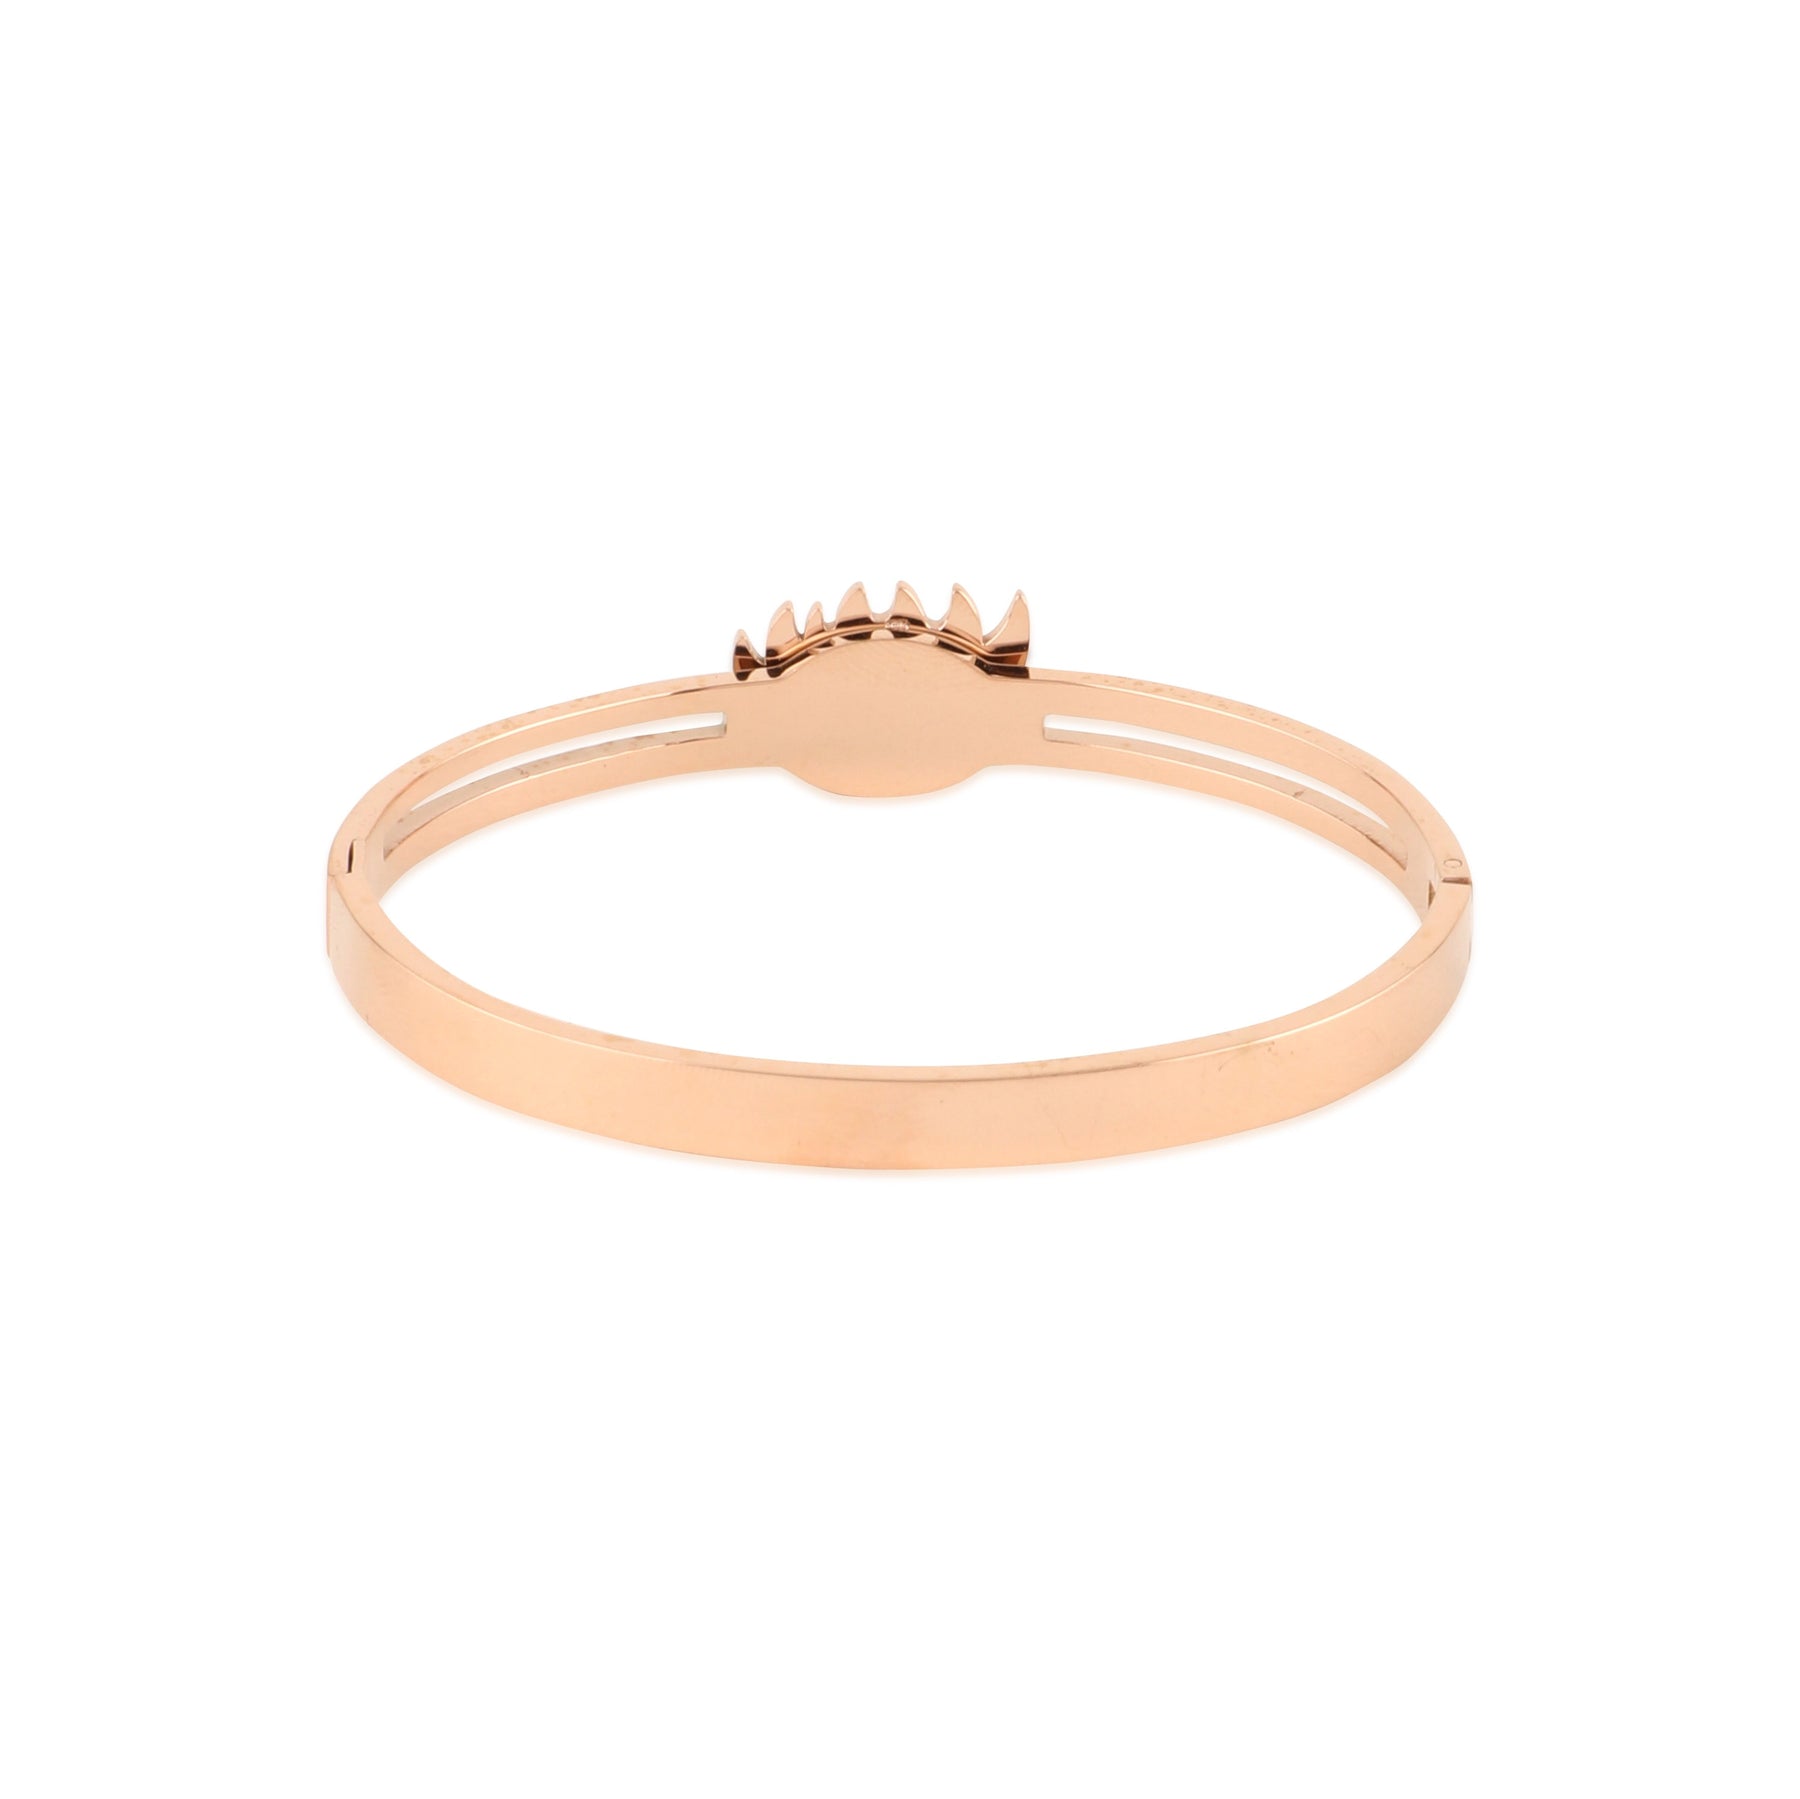 Michael Kors Limited Edition Pride 14K Rose Gold-Plated Sterling Silver Bangle  Bracelet - MKC1576AY791 - Watch Station